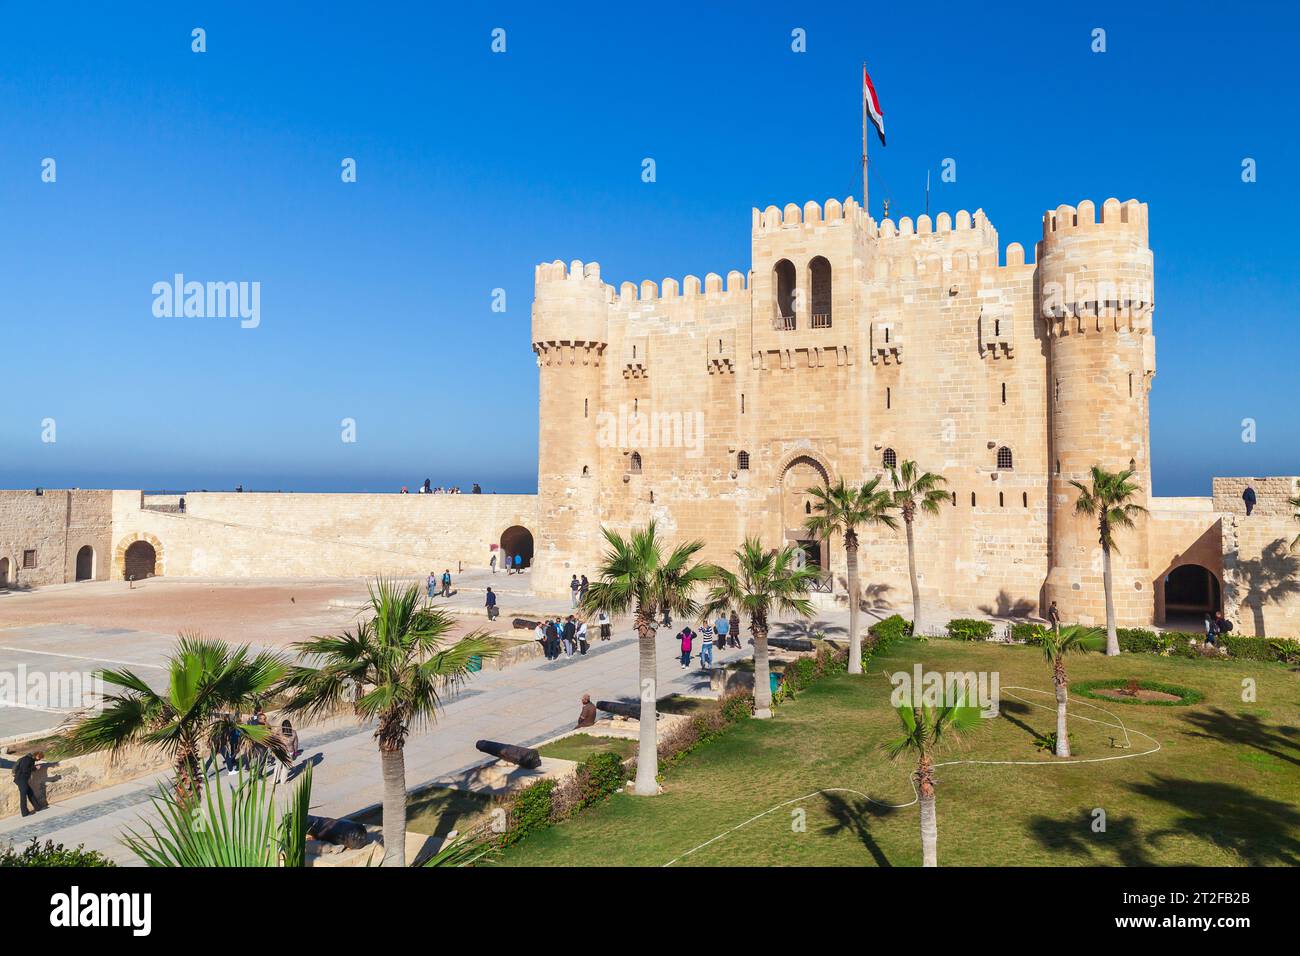 Alexandria, Egypt - December 14, 2018: Visitors walk in front of The Citadel of Qaitbay or the Fort of Qaitbay. It is a 15th-century defensive fortres Stock Photo